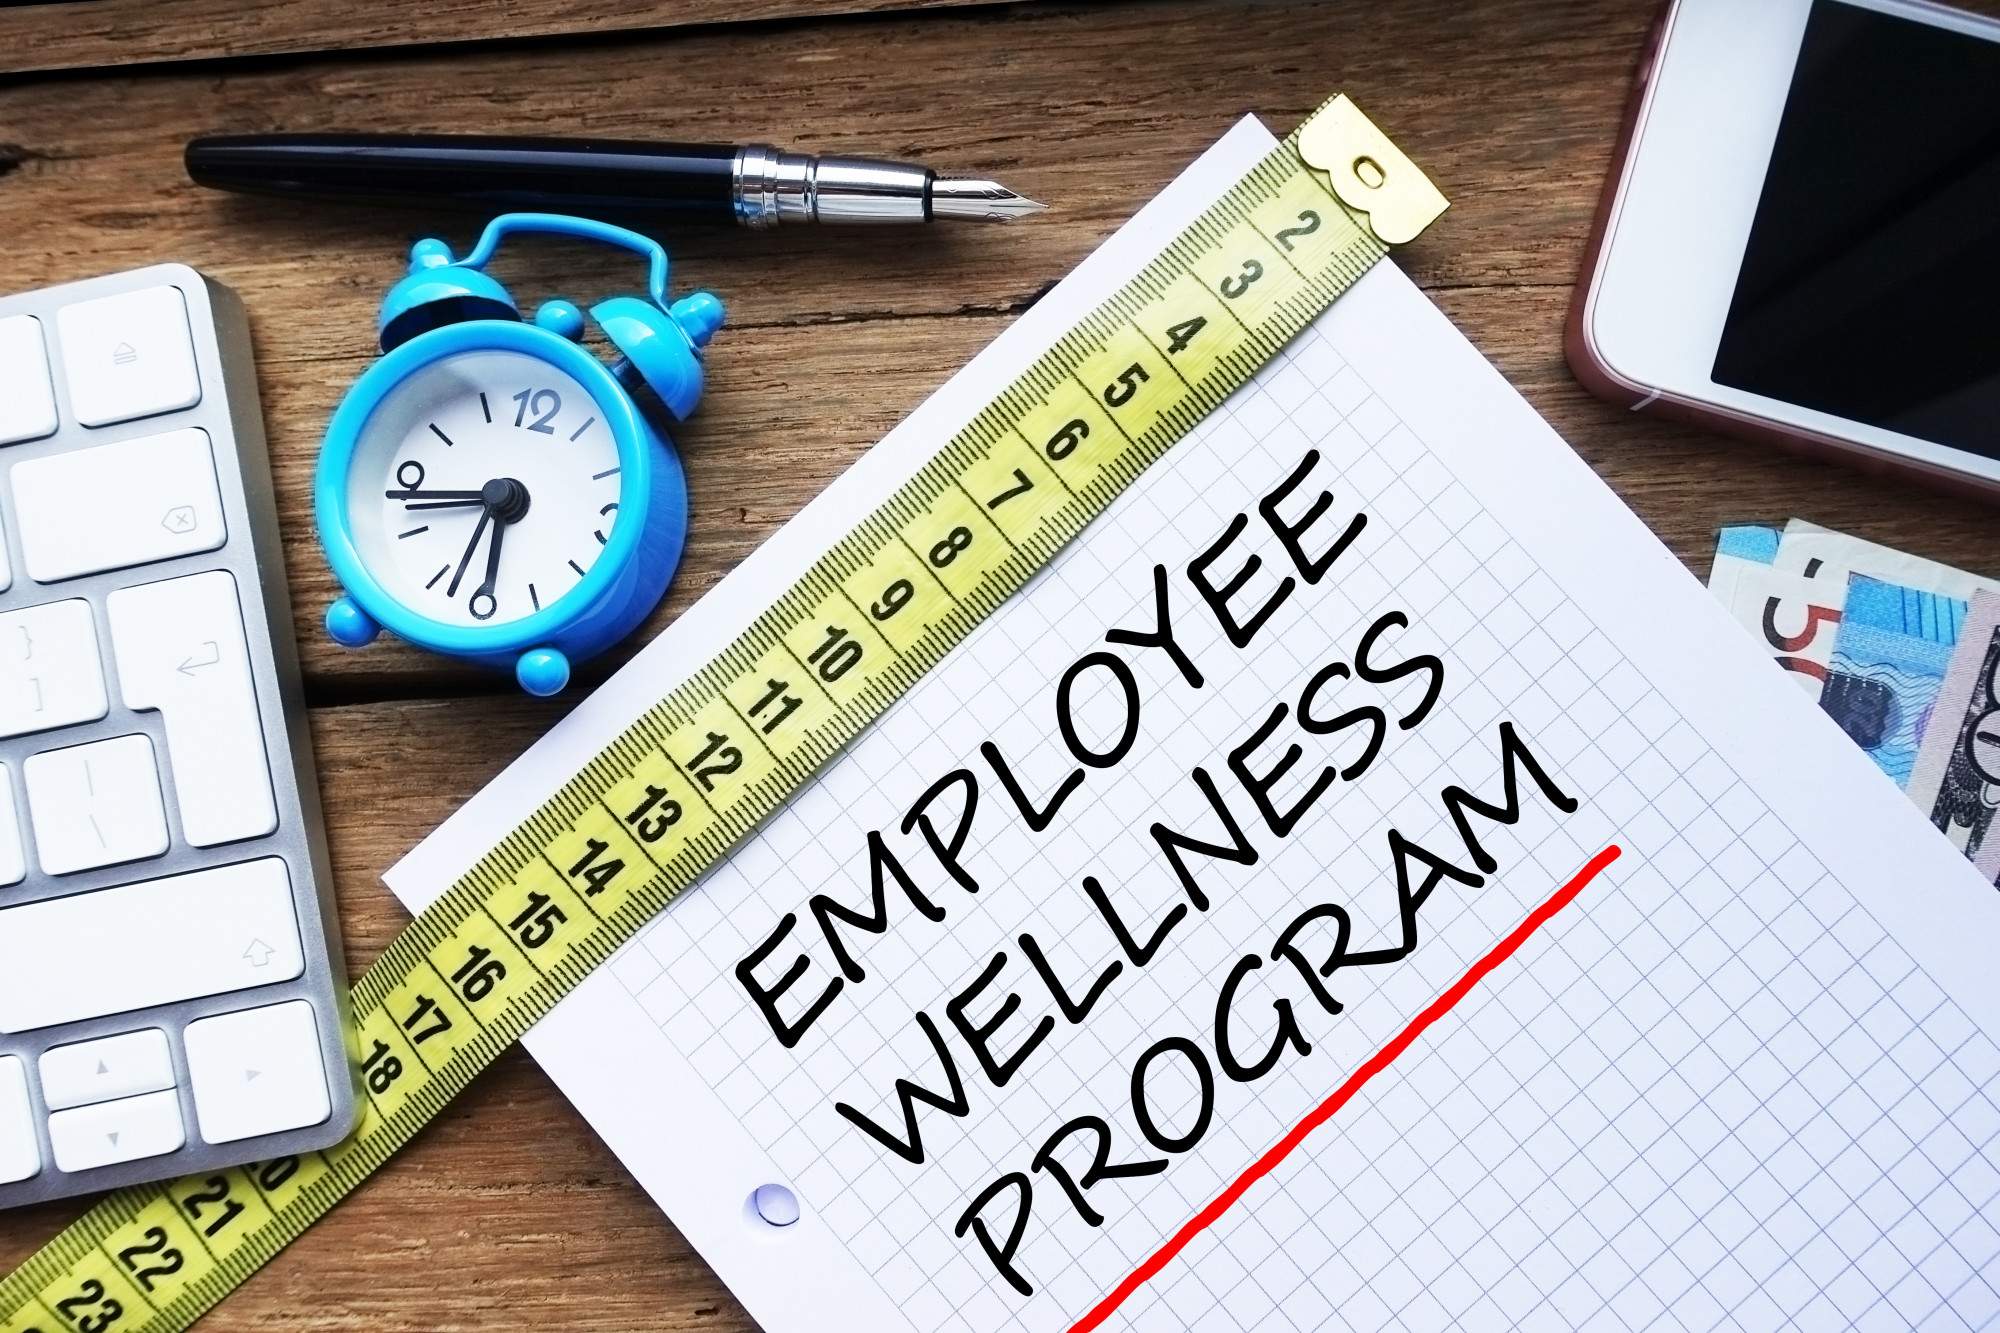 3 Employee Wellness Ideas To Include in Your Corporate Program